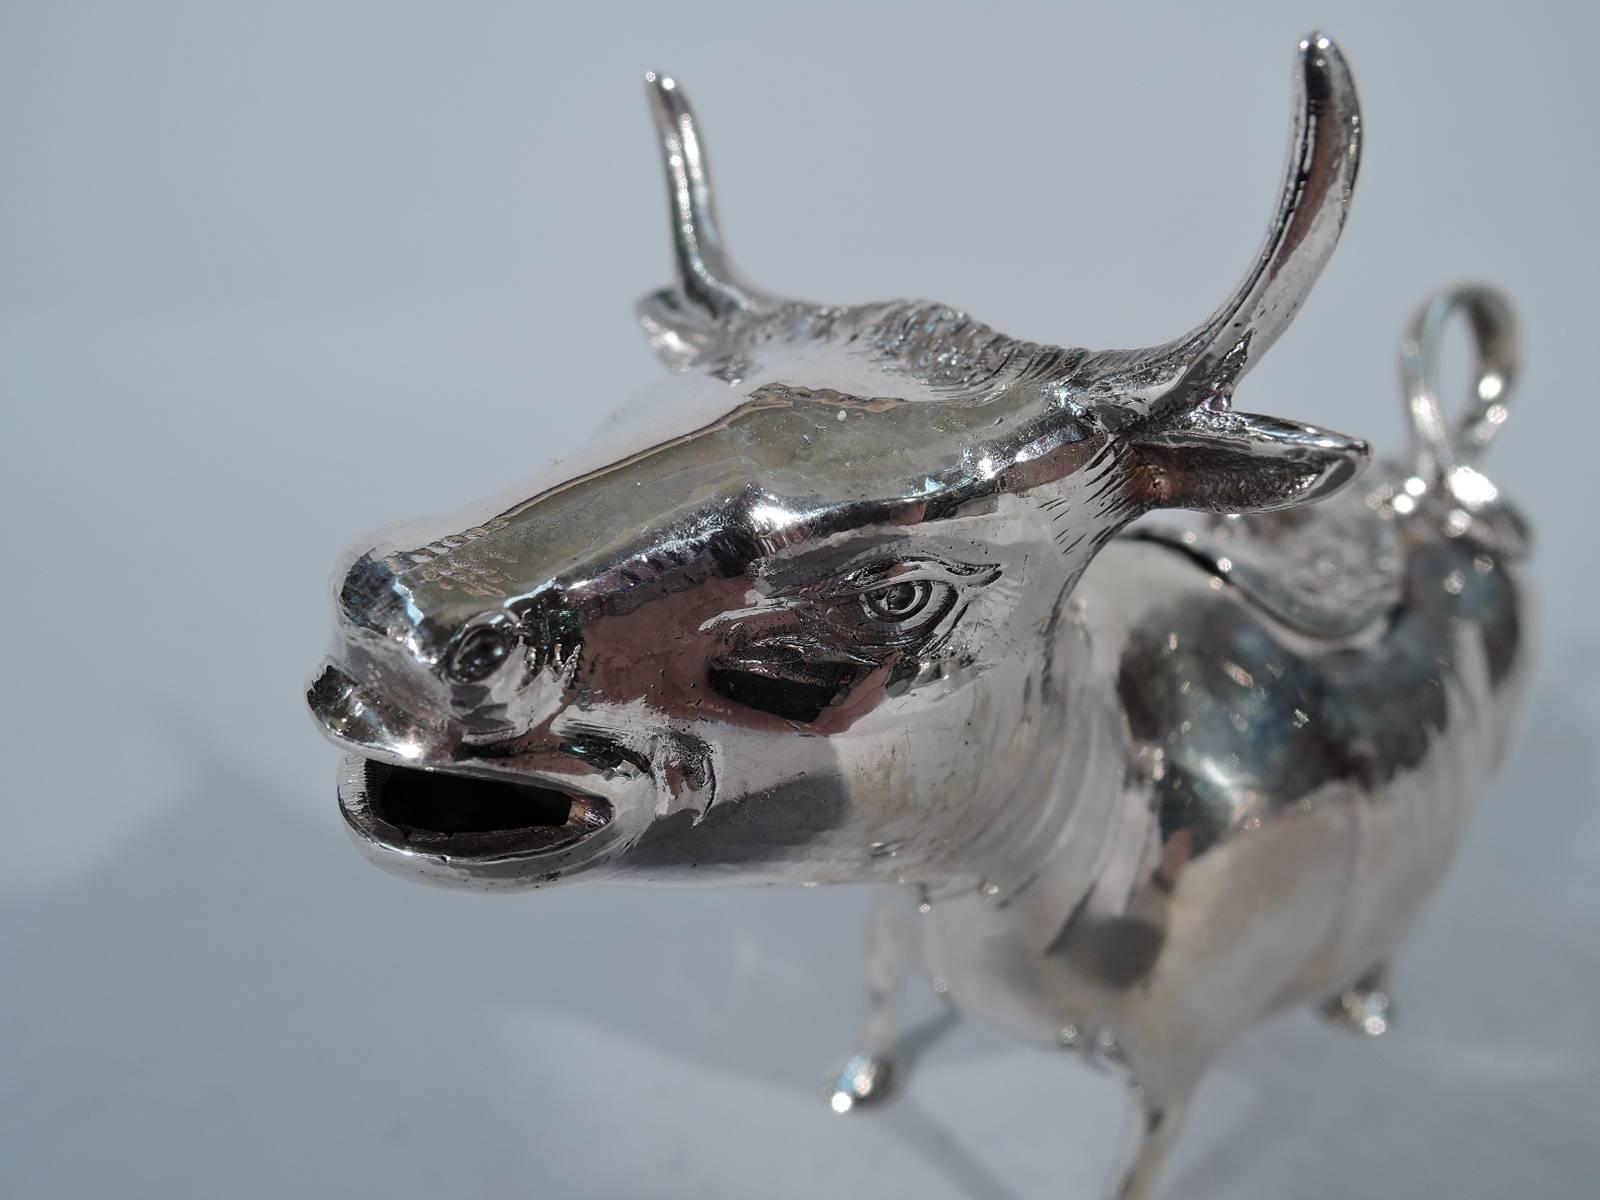 Sterling silver cow creamer. Made in Germany, circa 1950 for Cartier in New York. A sturdy quadruped with flexed ears, sharp horns and ring handle in form of flicked-back tail. Hinged back cover decorated with naif flowers and fly finial. Gaping